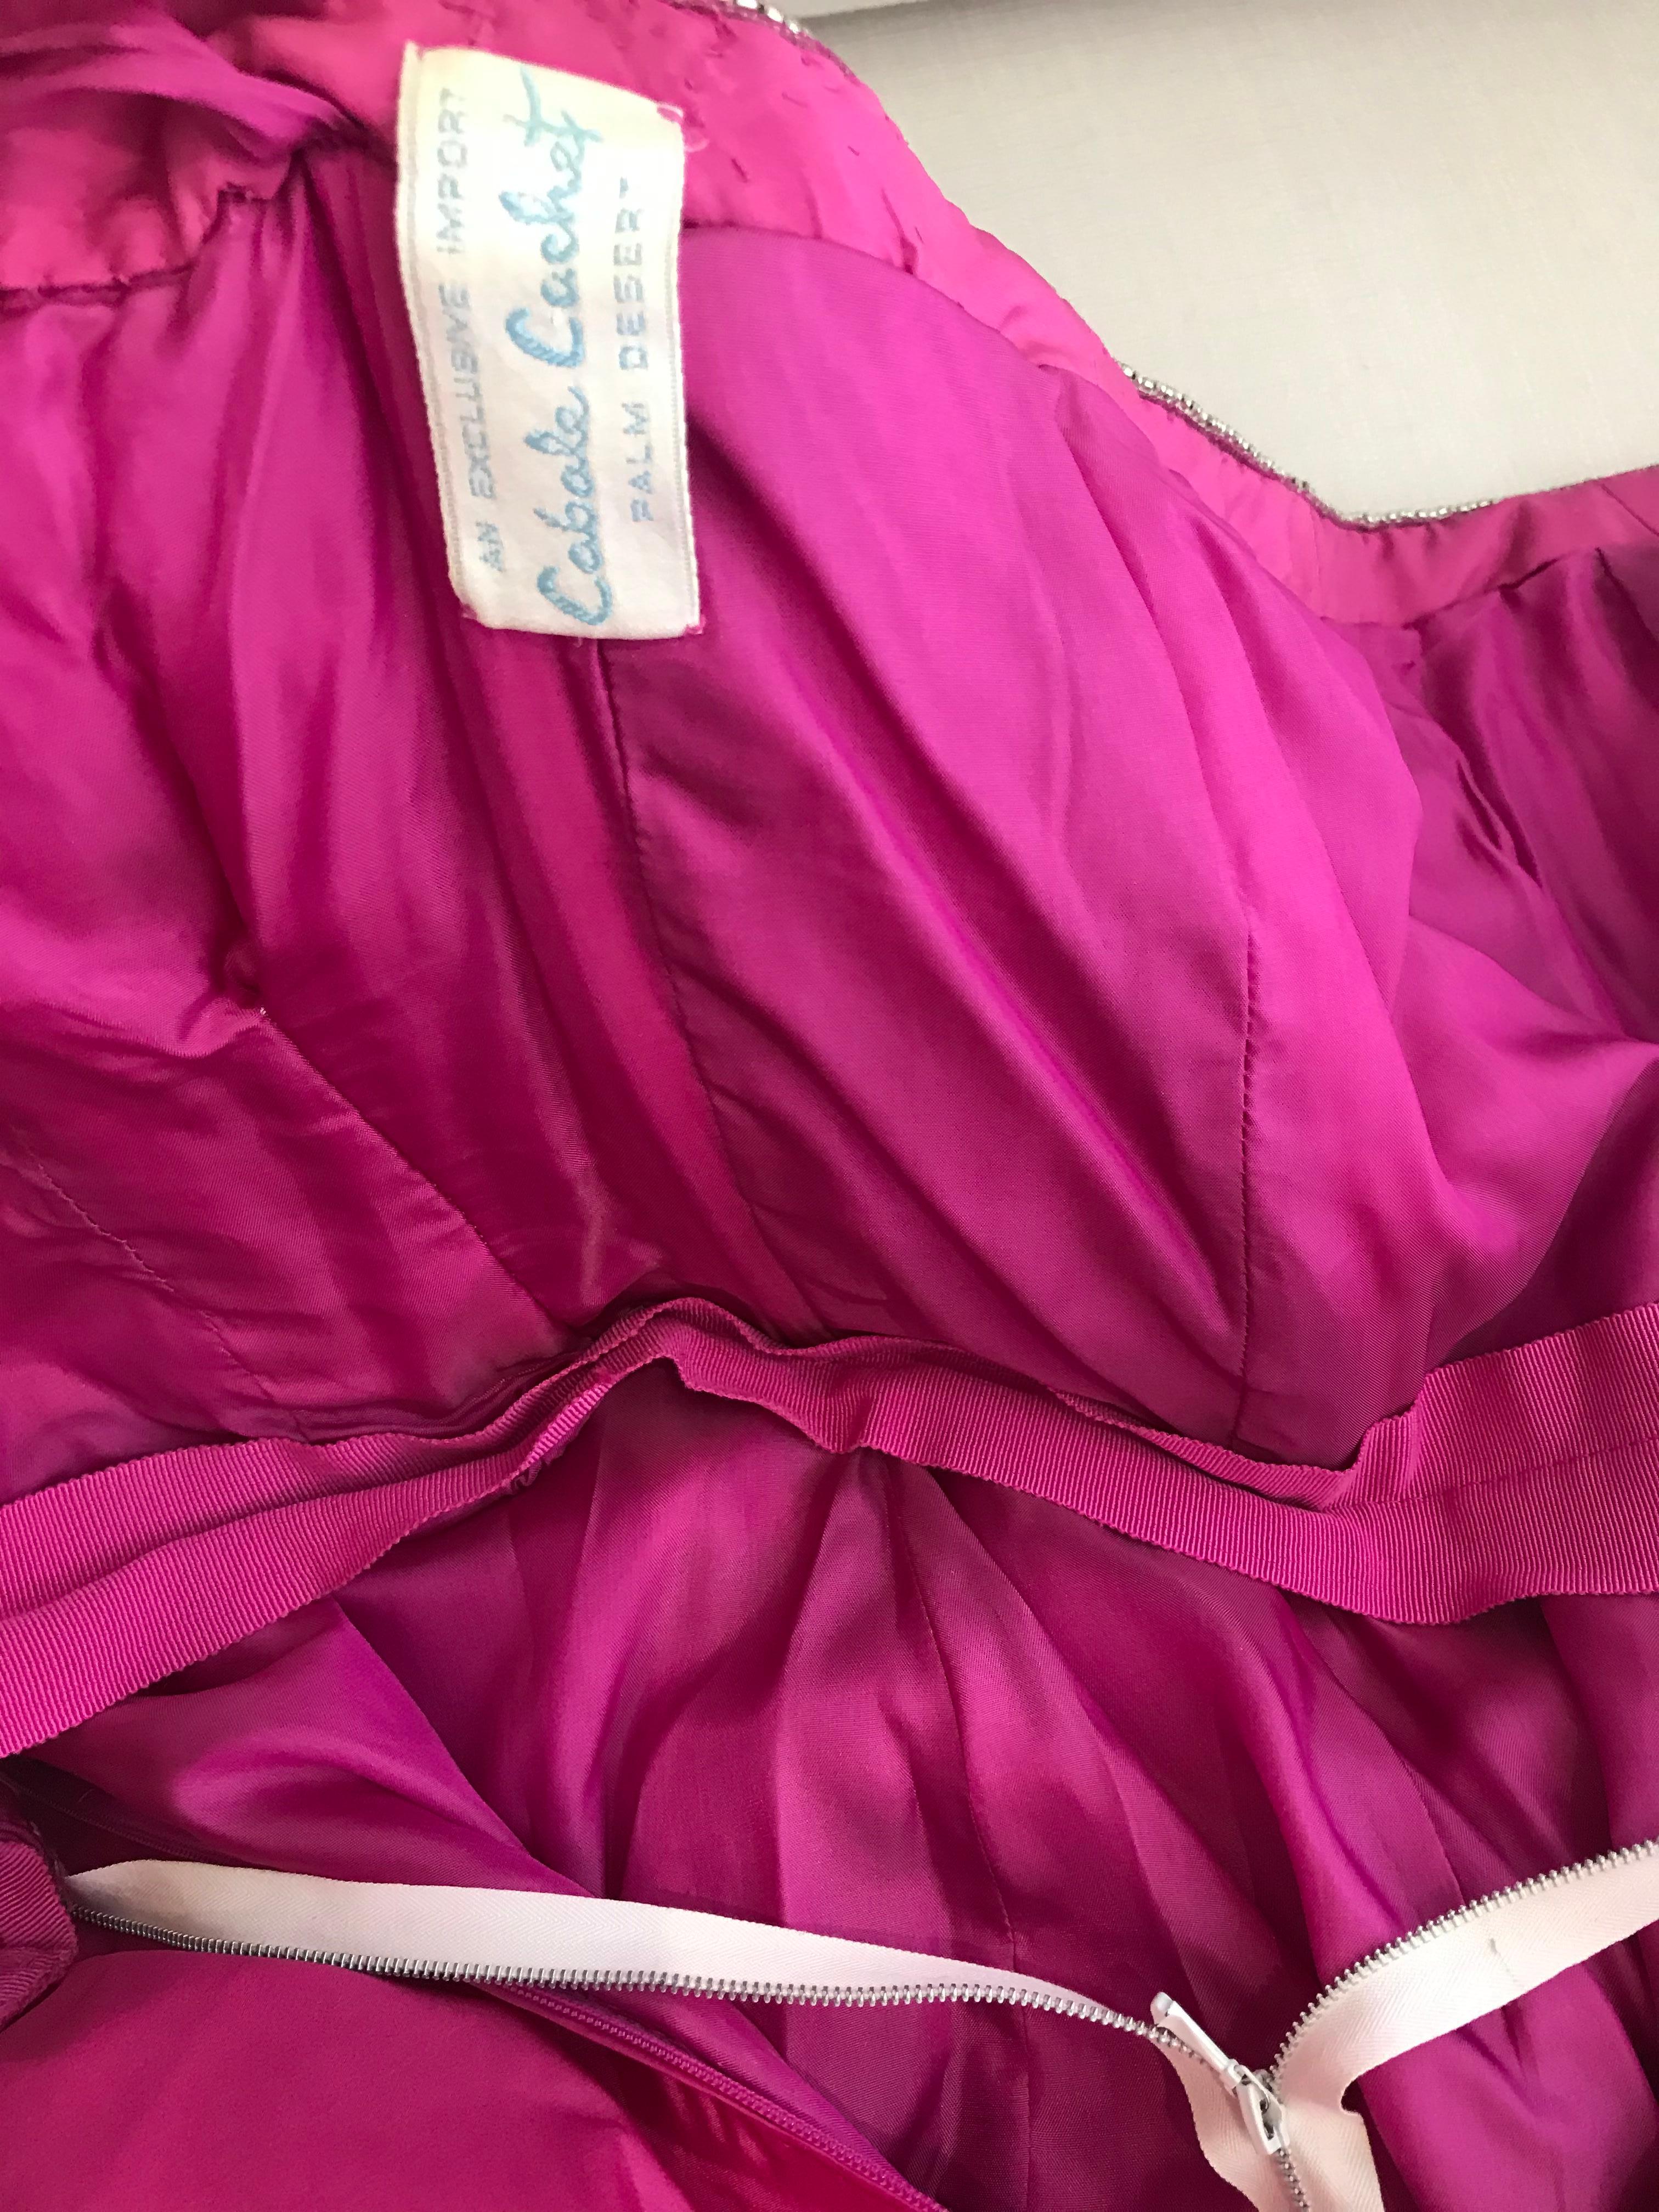 1950s Hot Pink Silk Strapless Cocktail Dress For Sale 1